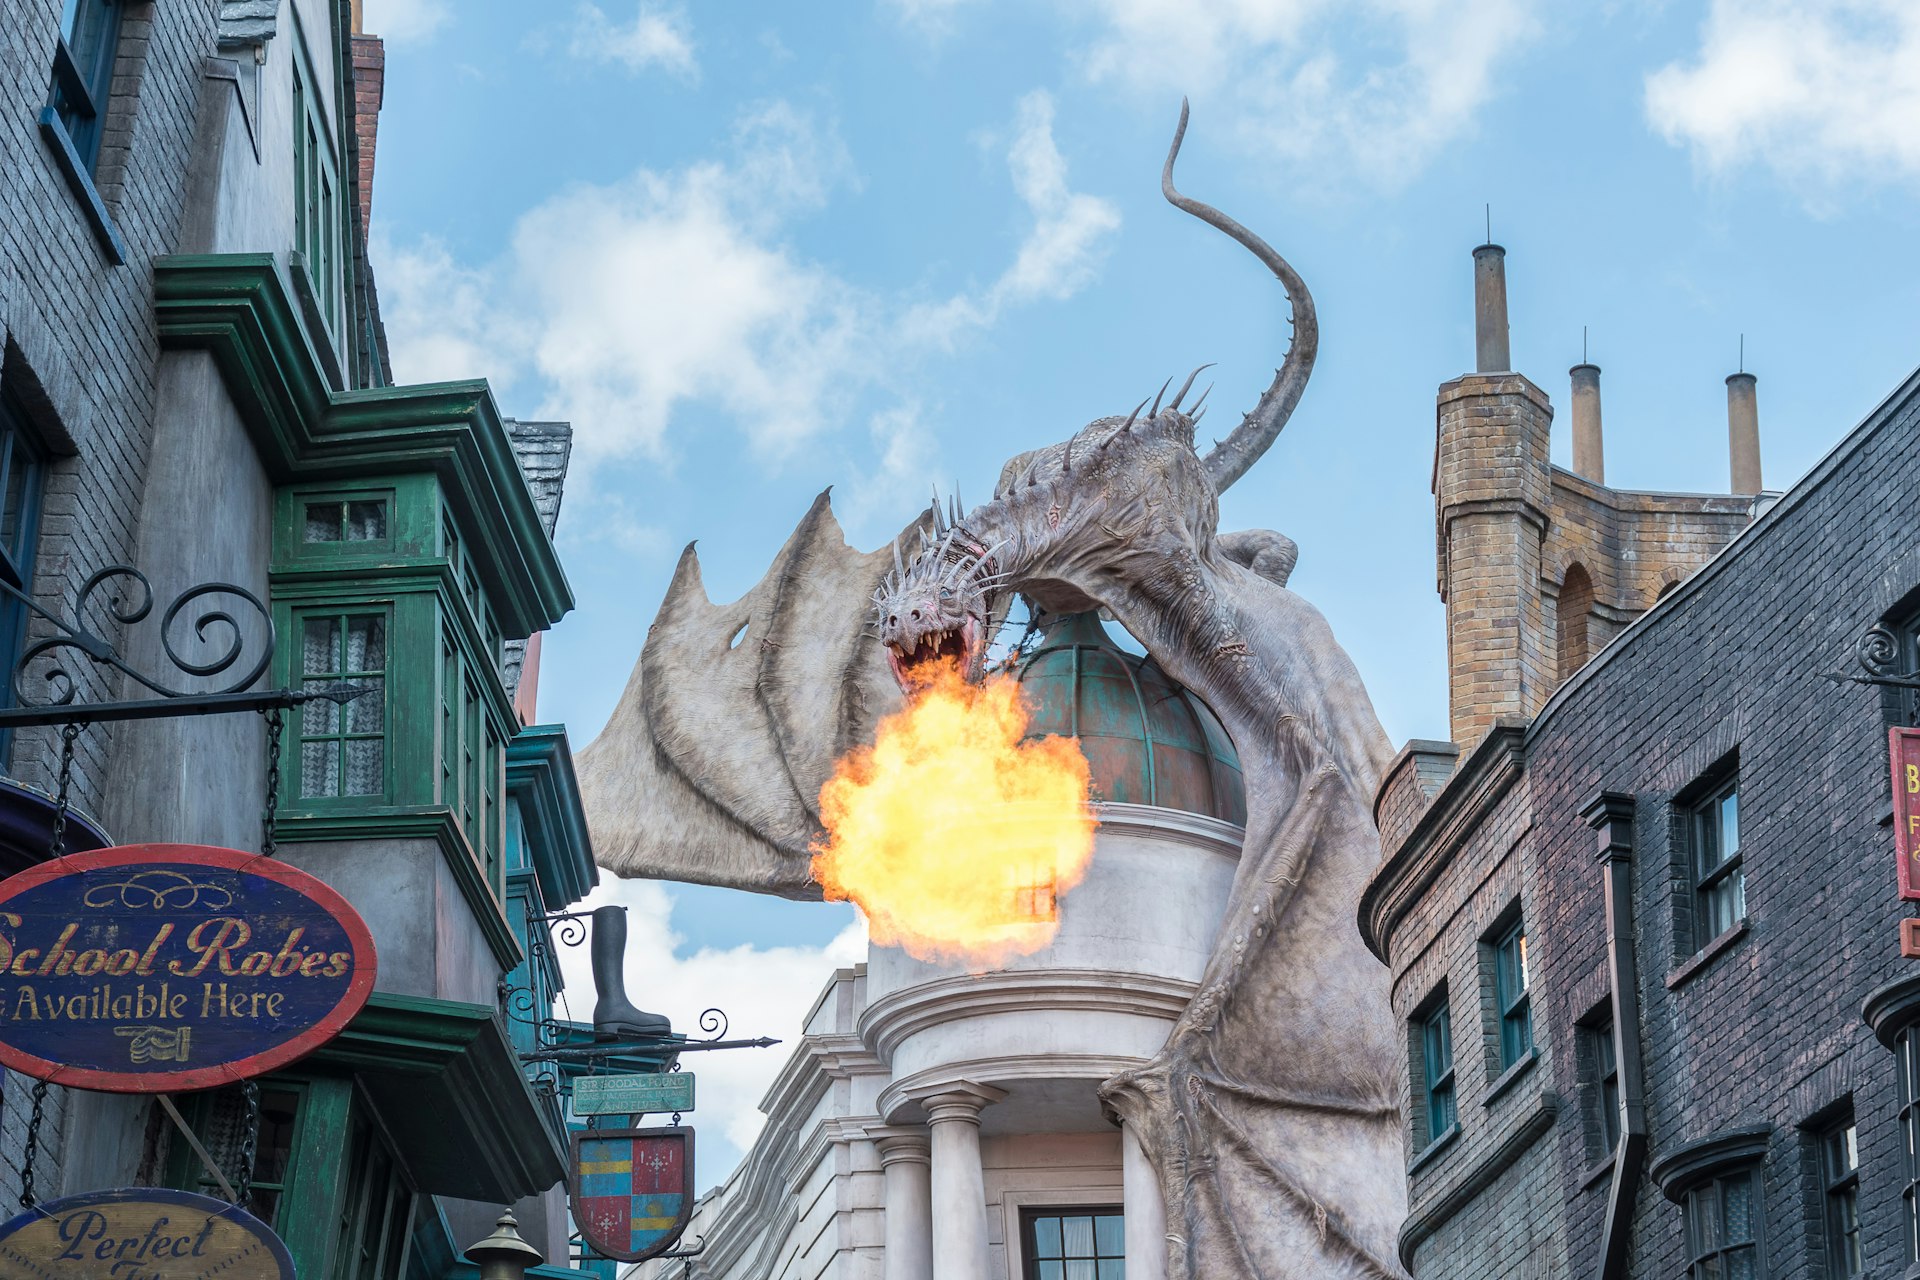 Gringotts Bank Dragon breathing fire The Wizarding World Of Harry Potter at Universal Studios Orlando. Universal Studios Orlando is a theme park in Orlando, Florida.